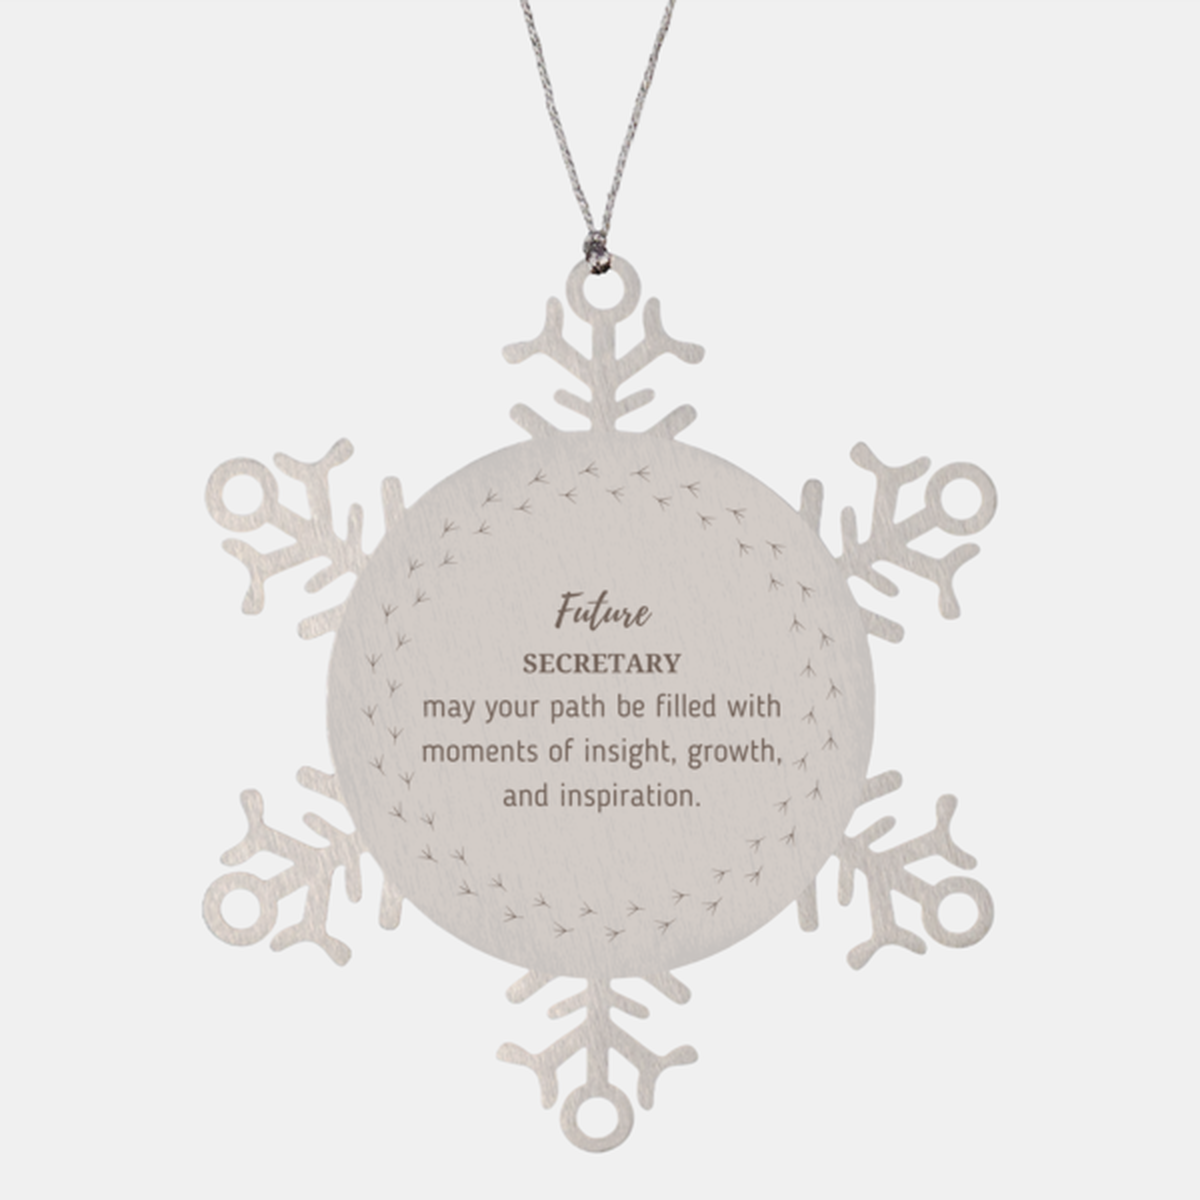 Future Secretary Gifts, May your path be filled with moments of insight, Graduation Gifts for New Secretary, Christmas Unique Snowflake Ornament For Men, Women, Friends